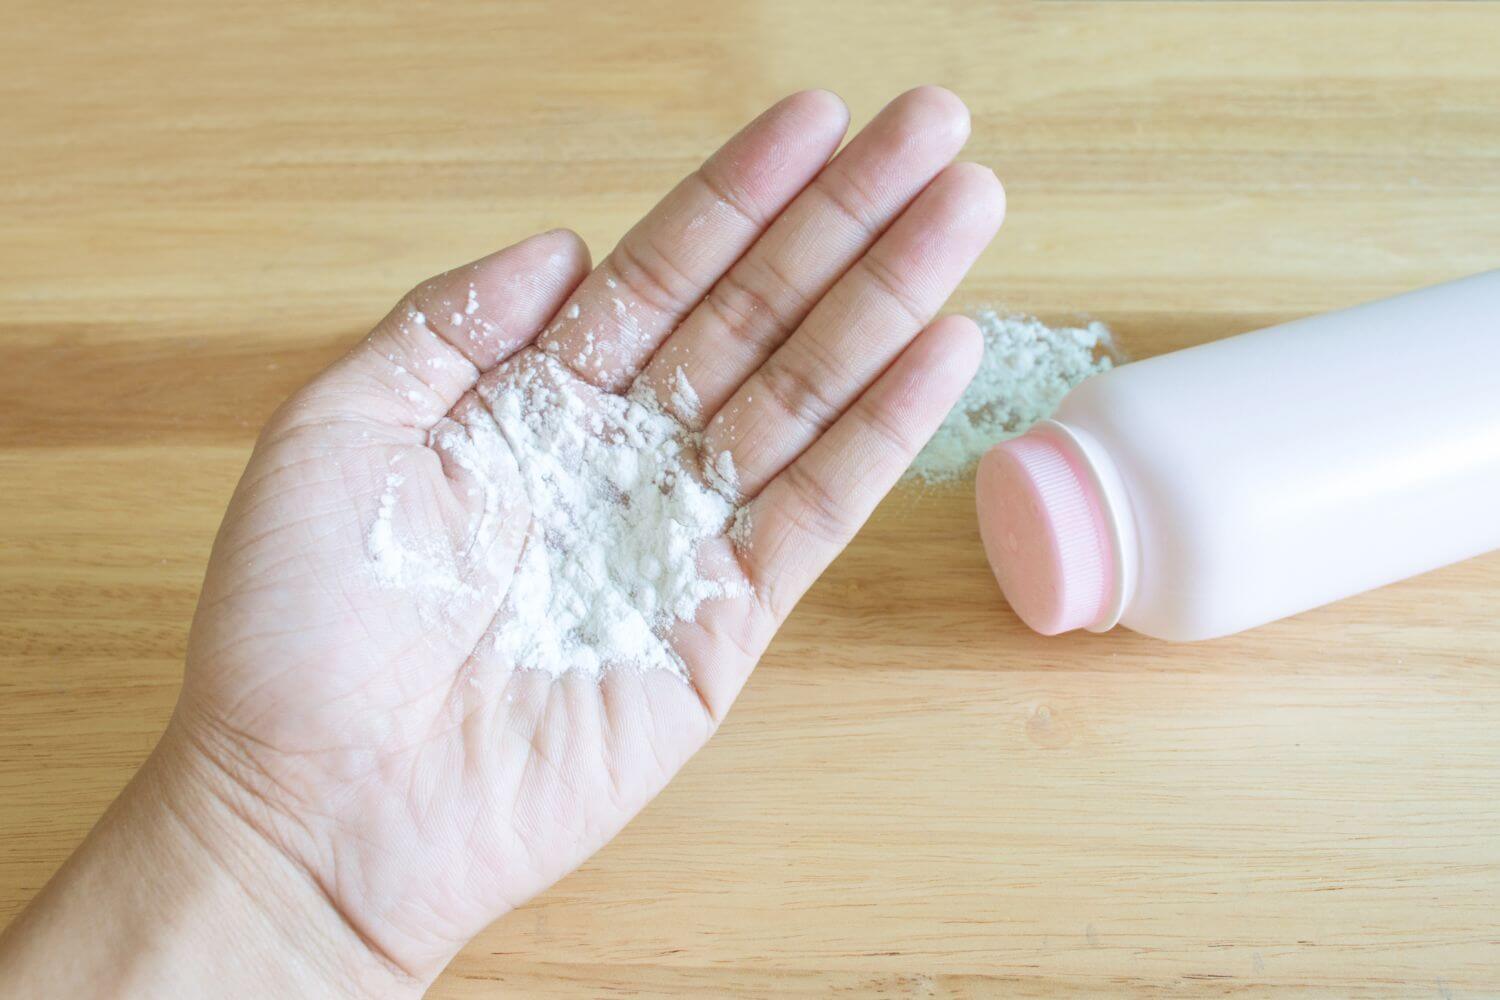 Concerns Around Use Of Contaminated Talc In Cosmetic Body Powder And Make-Up Products And Lack Of Consumer Awareness